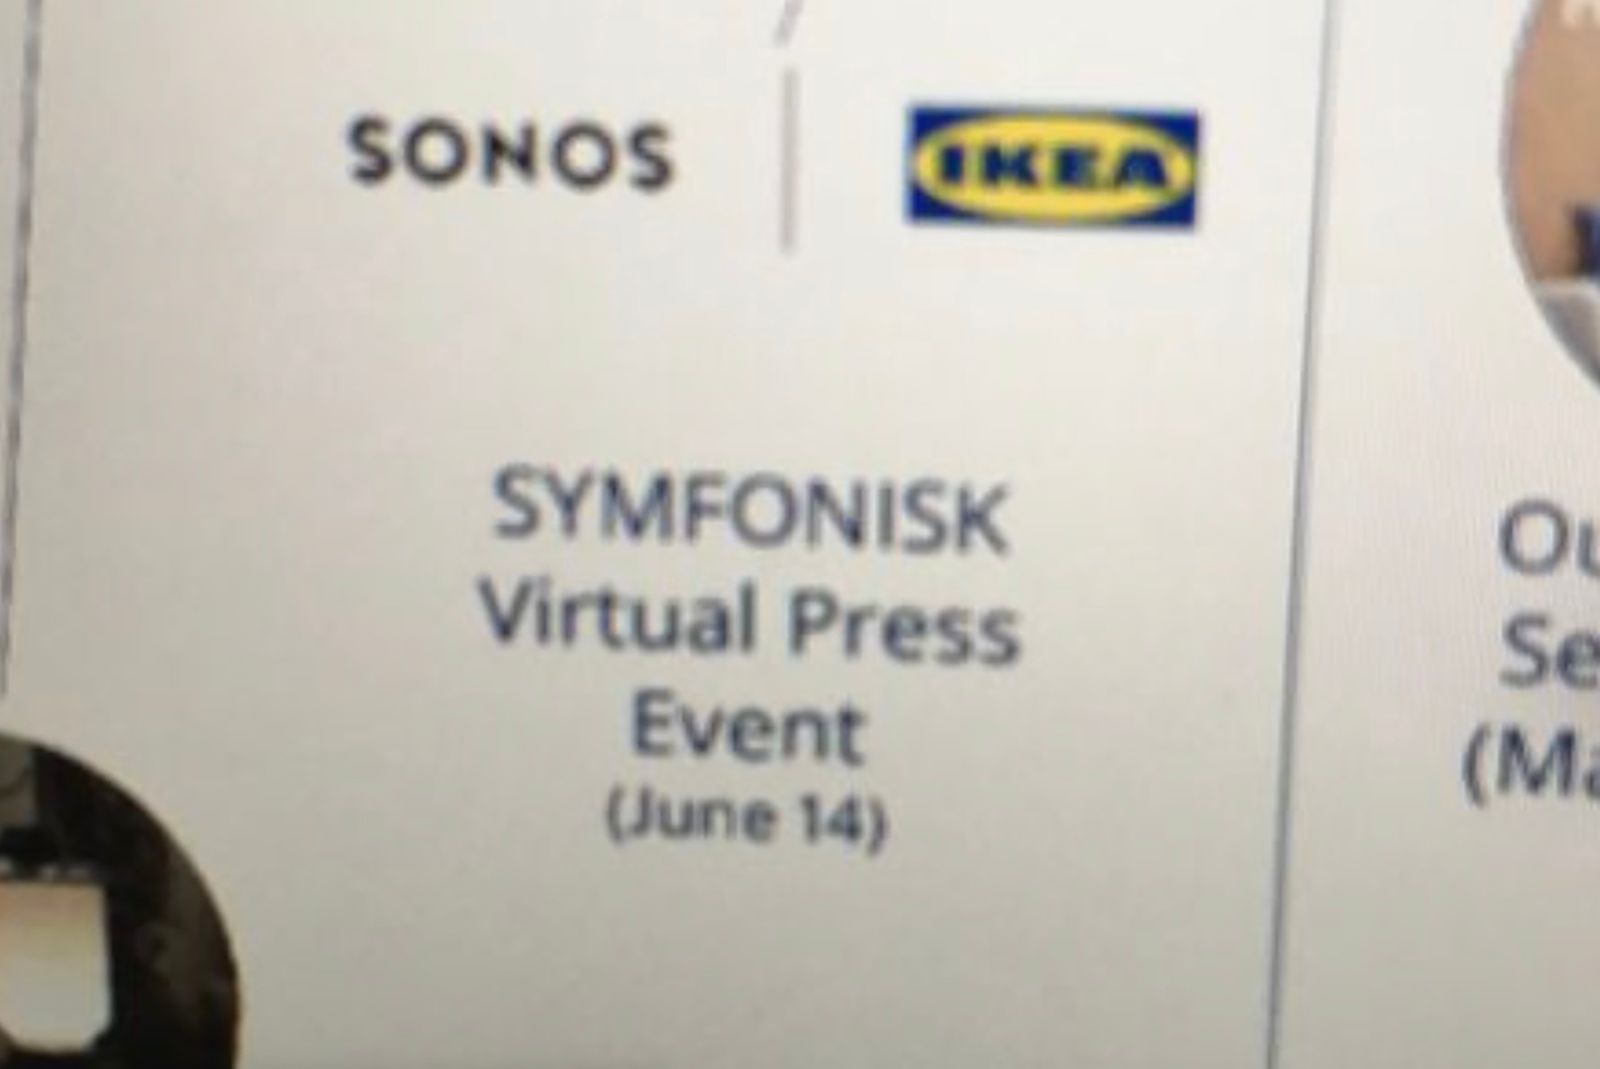 Ikea calendar leak points to new Sonos Symfonisk products coming in June photo 2